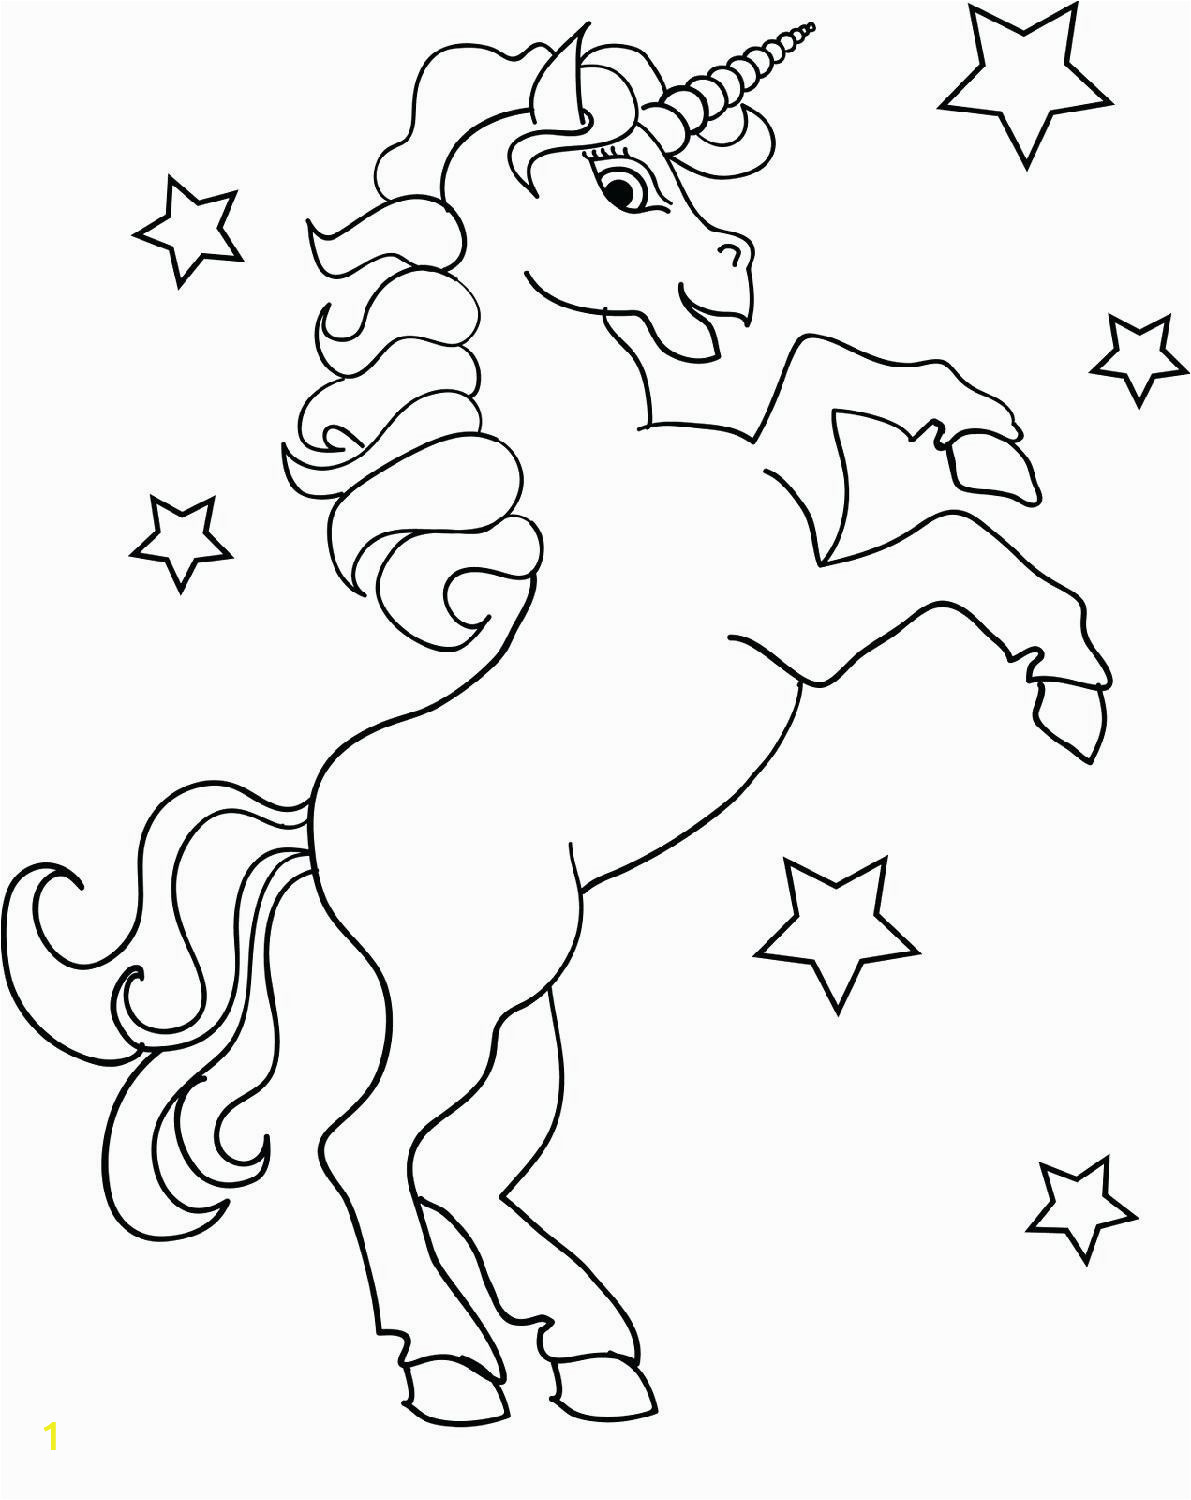 Free Printable Coloring Pages Unicorns Printable Unicorn Coloring Pages Ideas for Kids